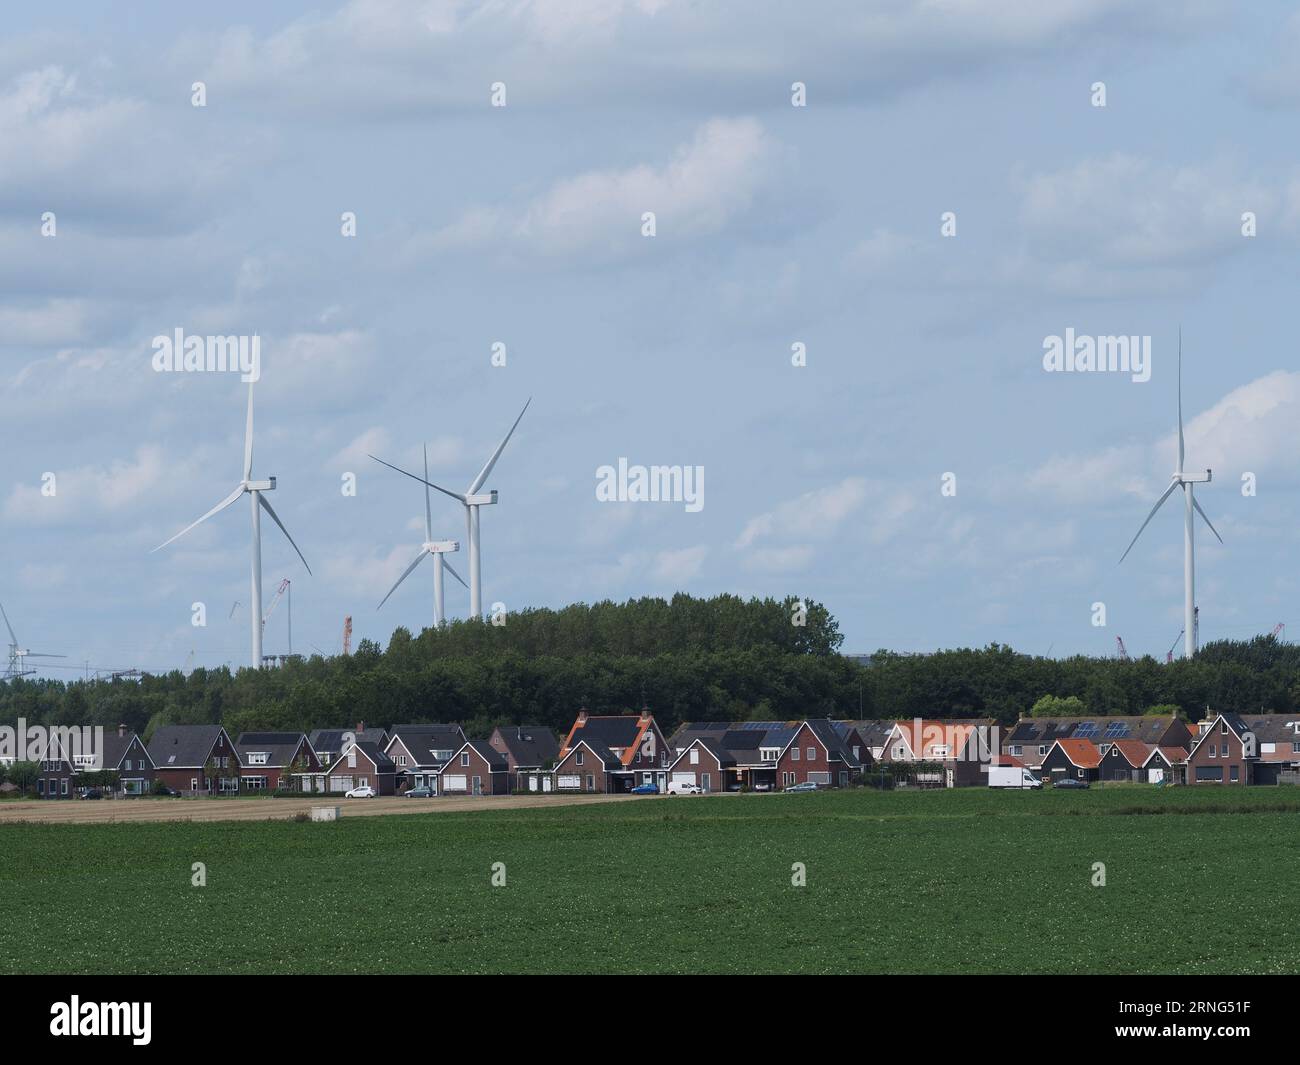 The town of Borssele, Zeeland, the Netherlands with huge wind turbines towering over the houses. Stock Photo